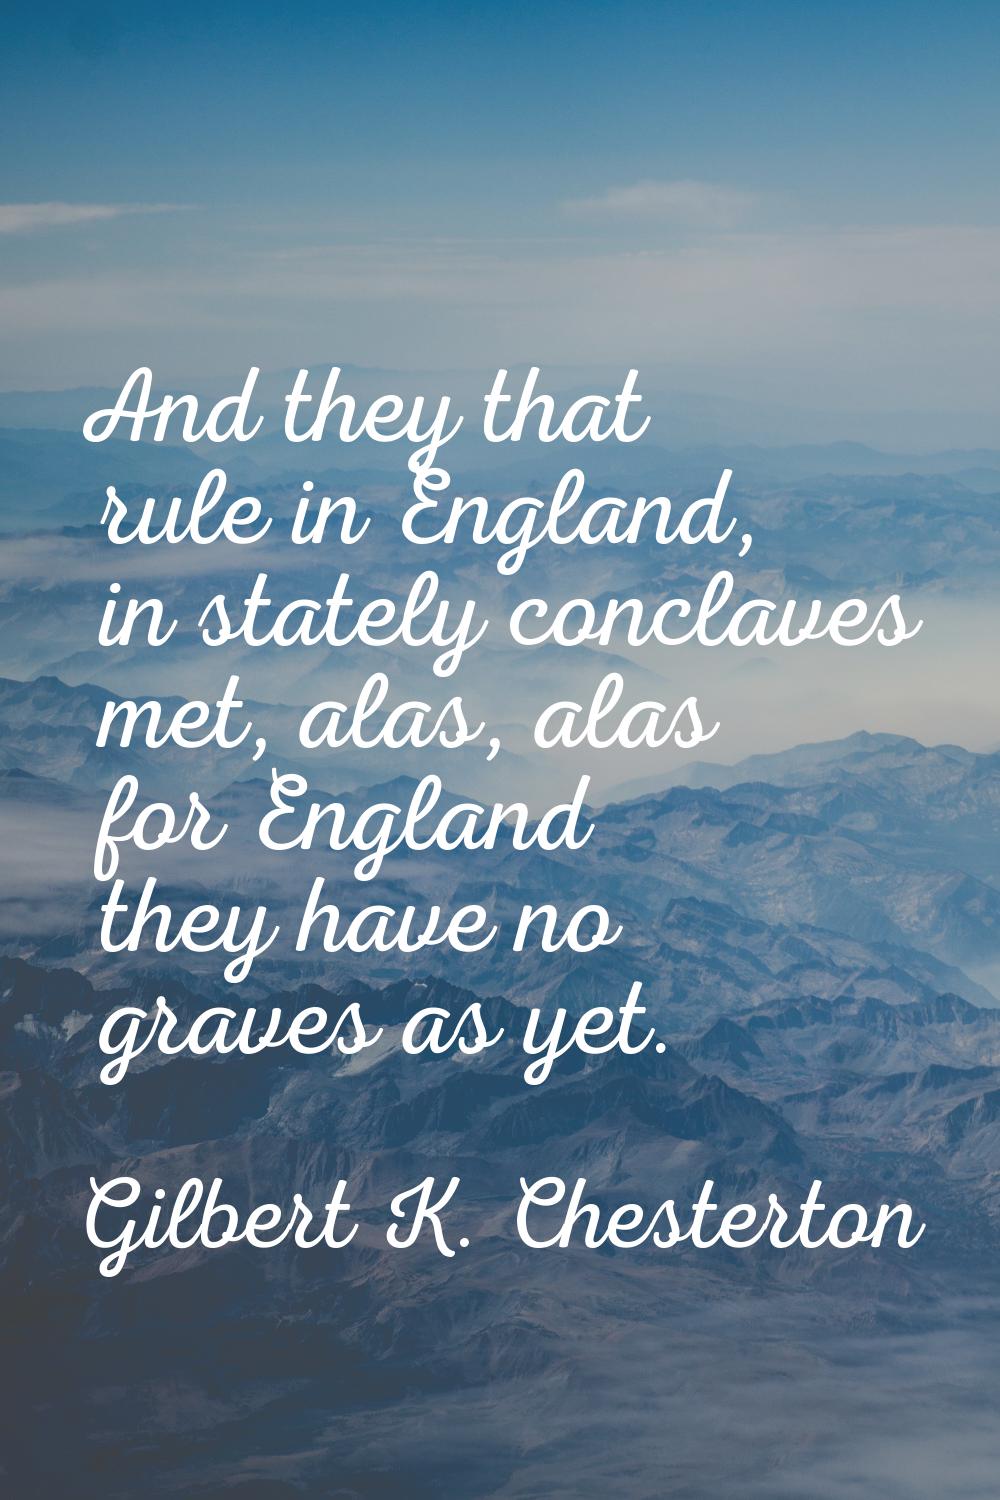 And they that rule in England, in stately conclaves met, alas, alas for England they have no graves